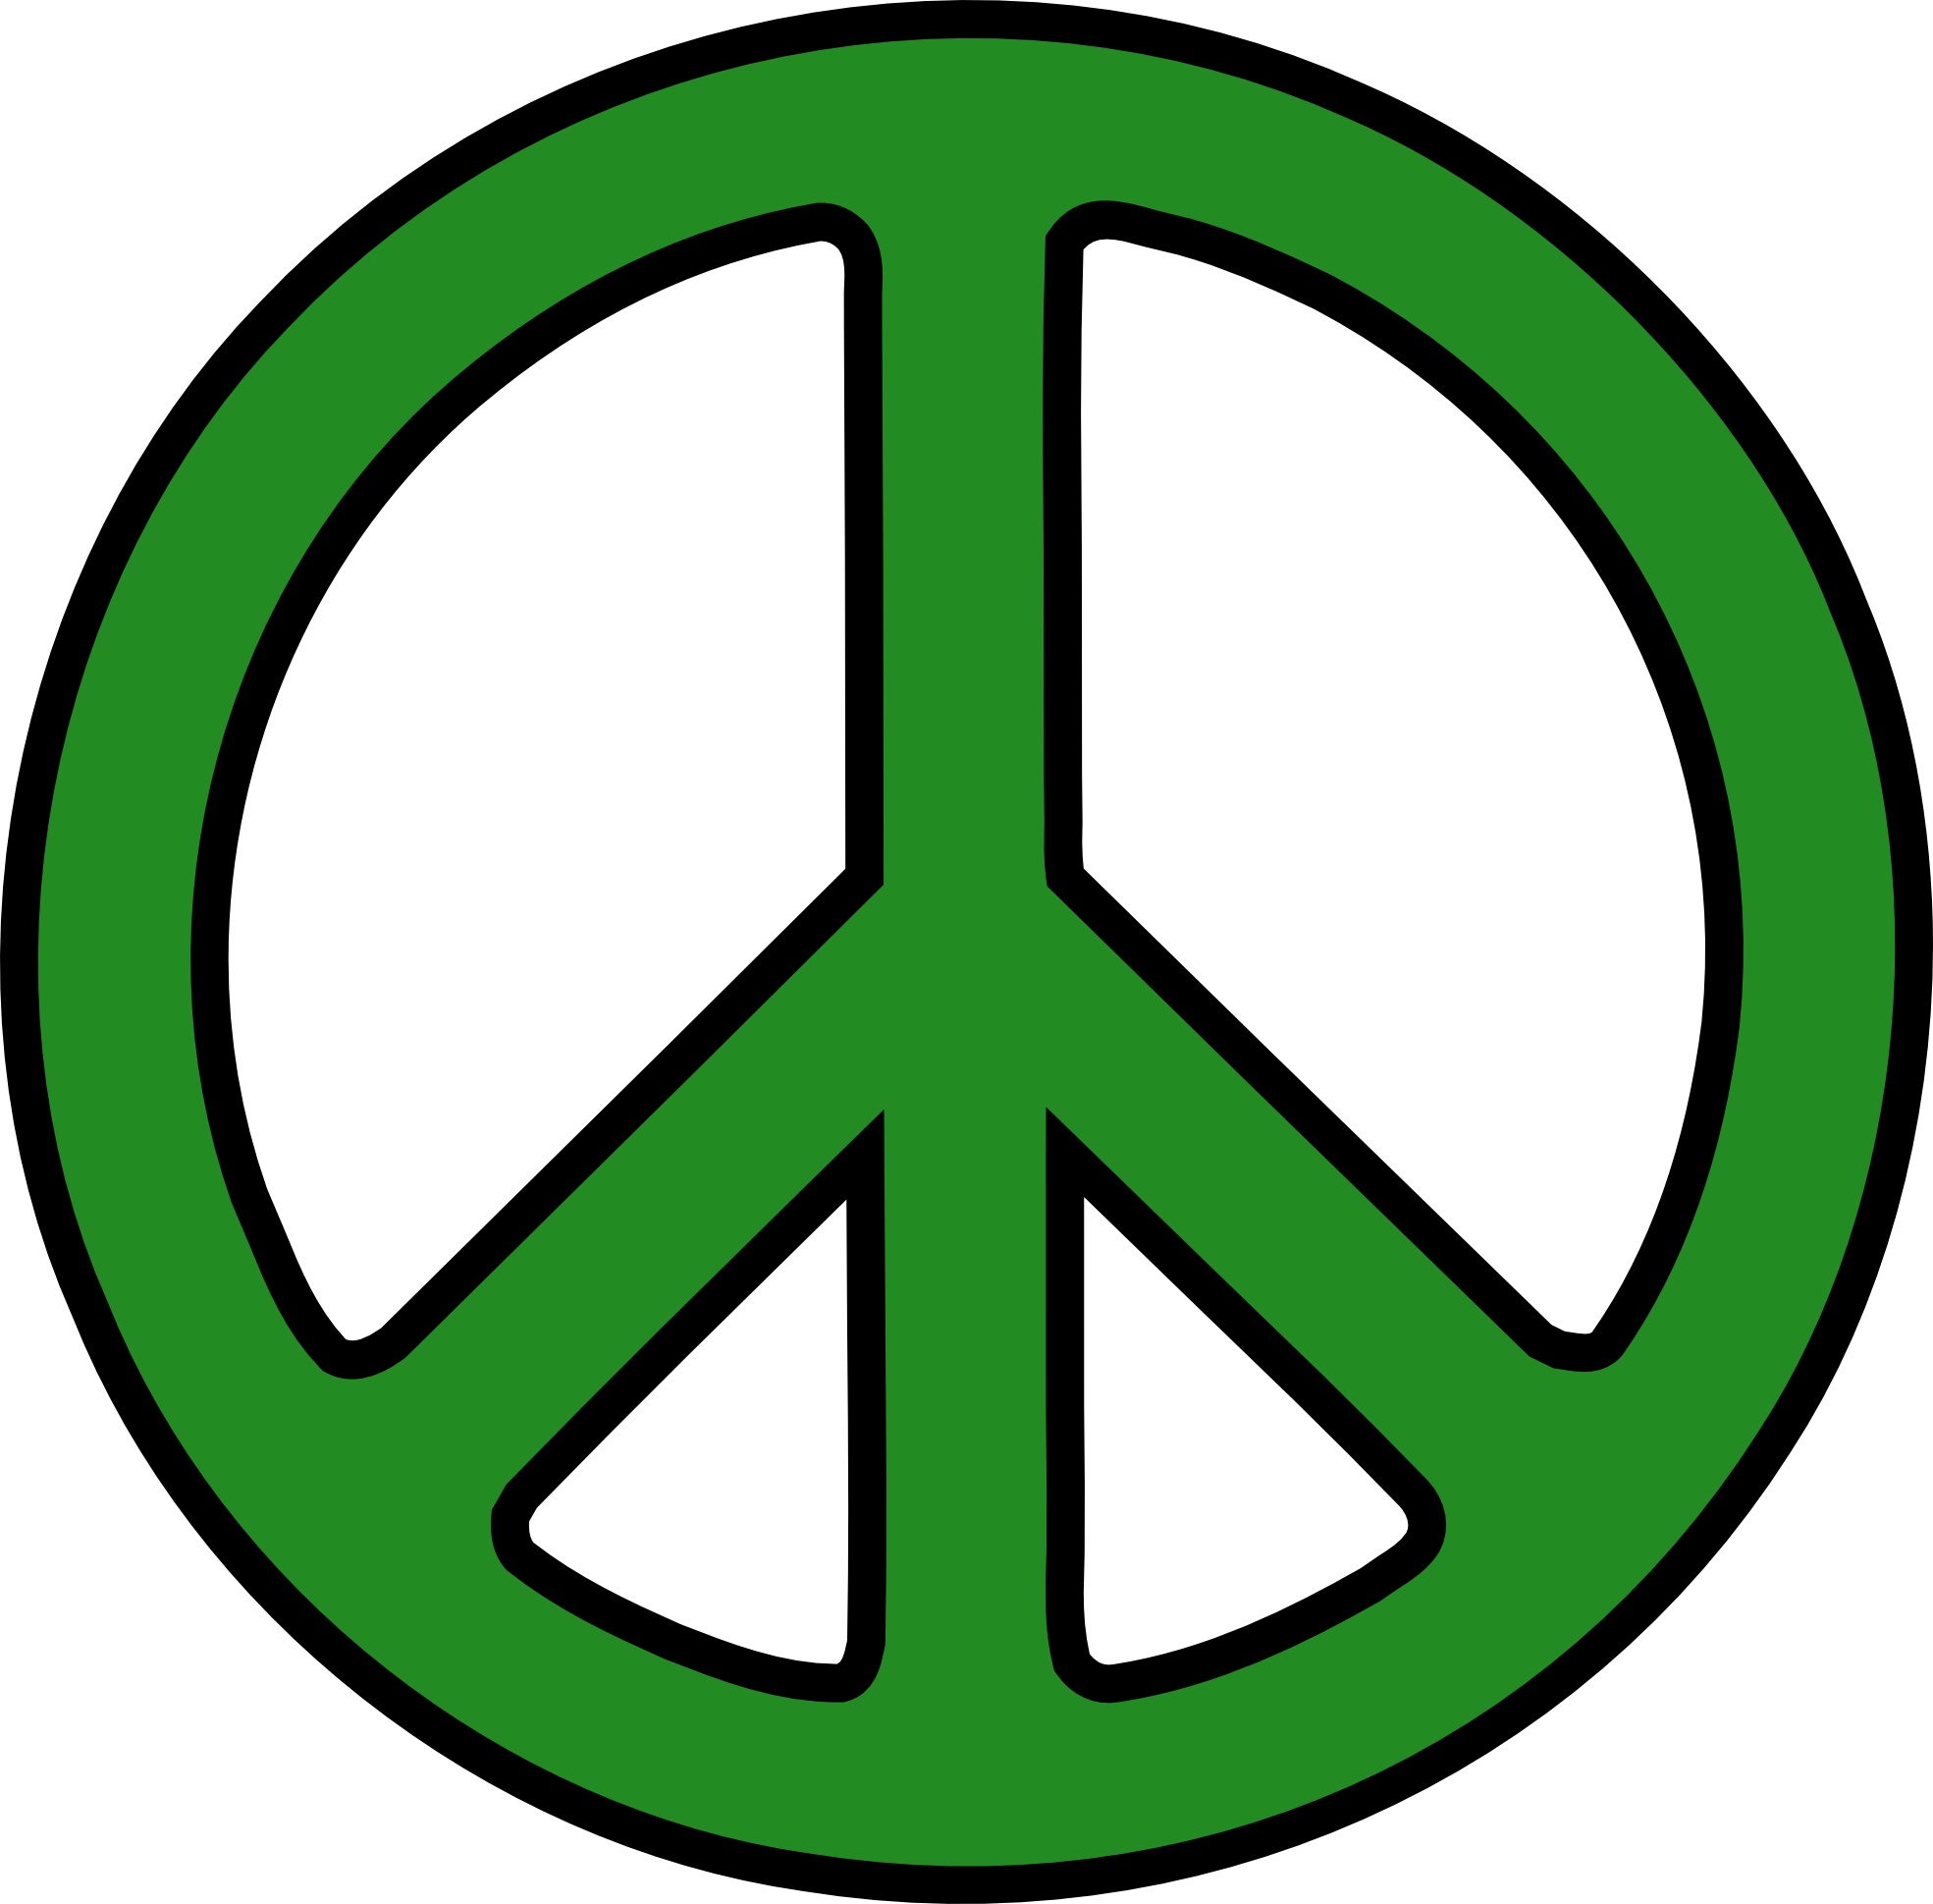 A Green Peace Sign On A Black Background